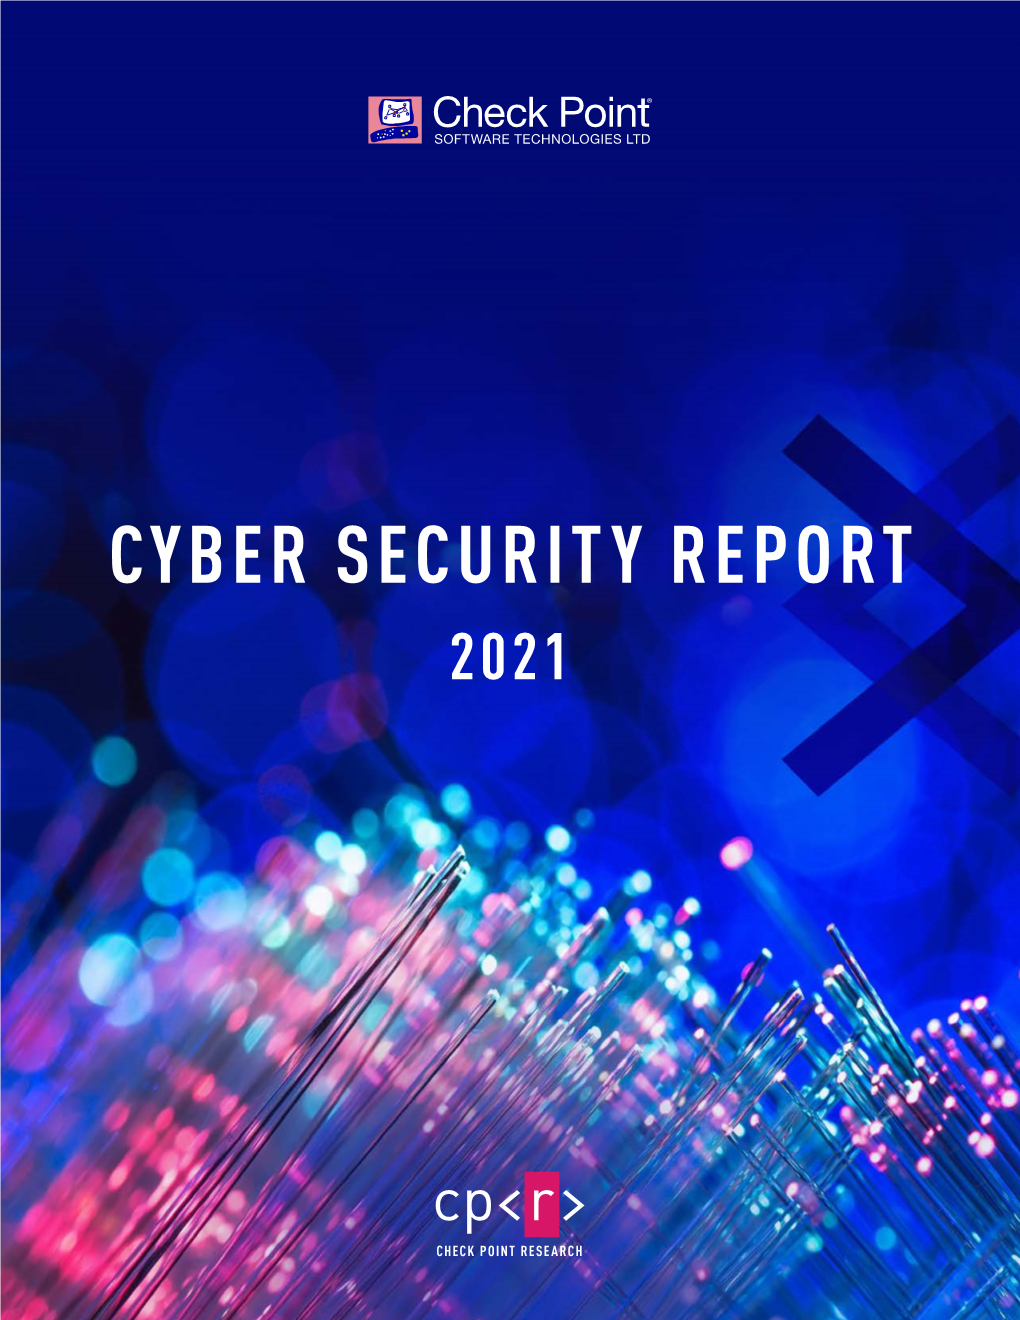 Cyber Security Report 2021 Contents